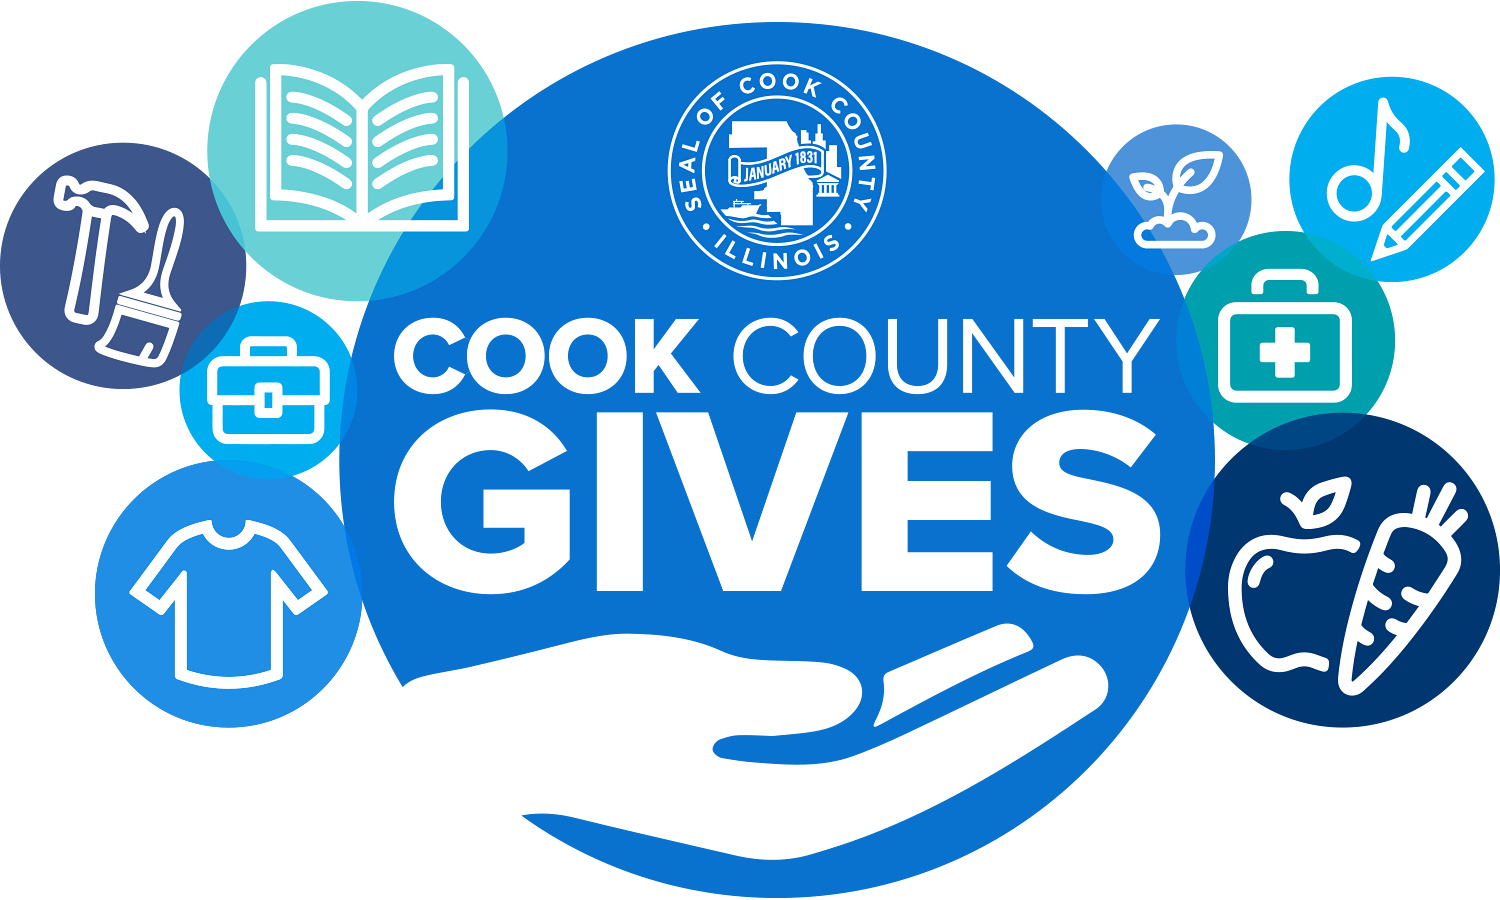 Cook County Gives campaign logo